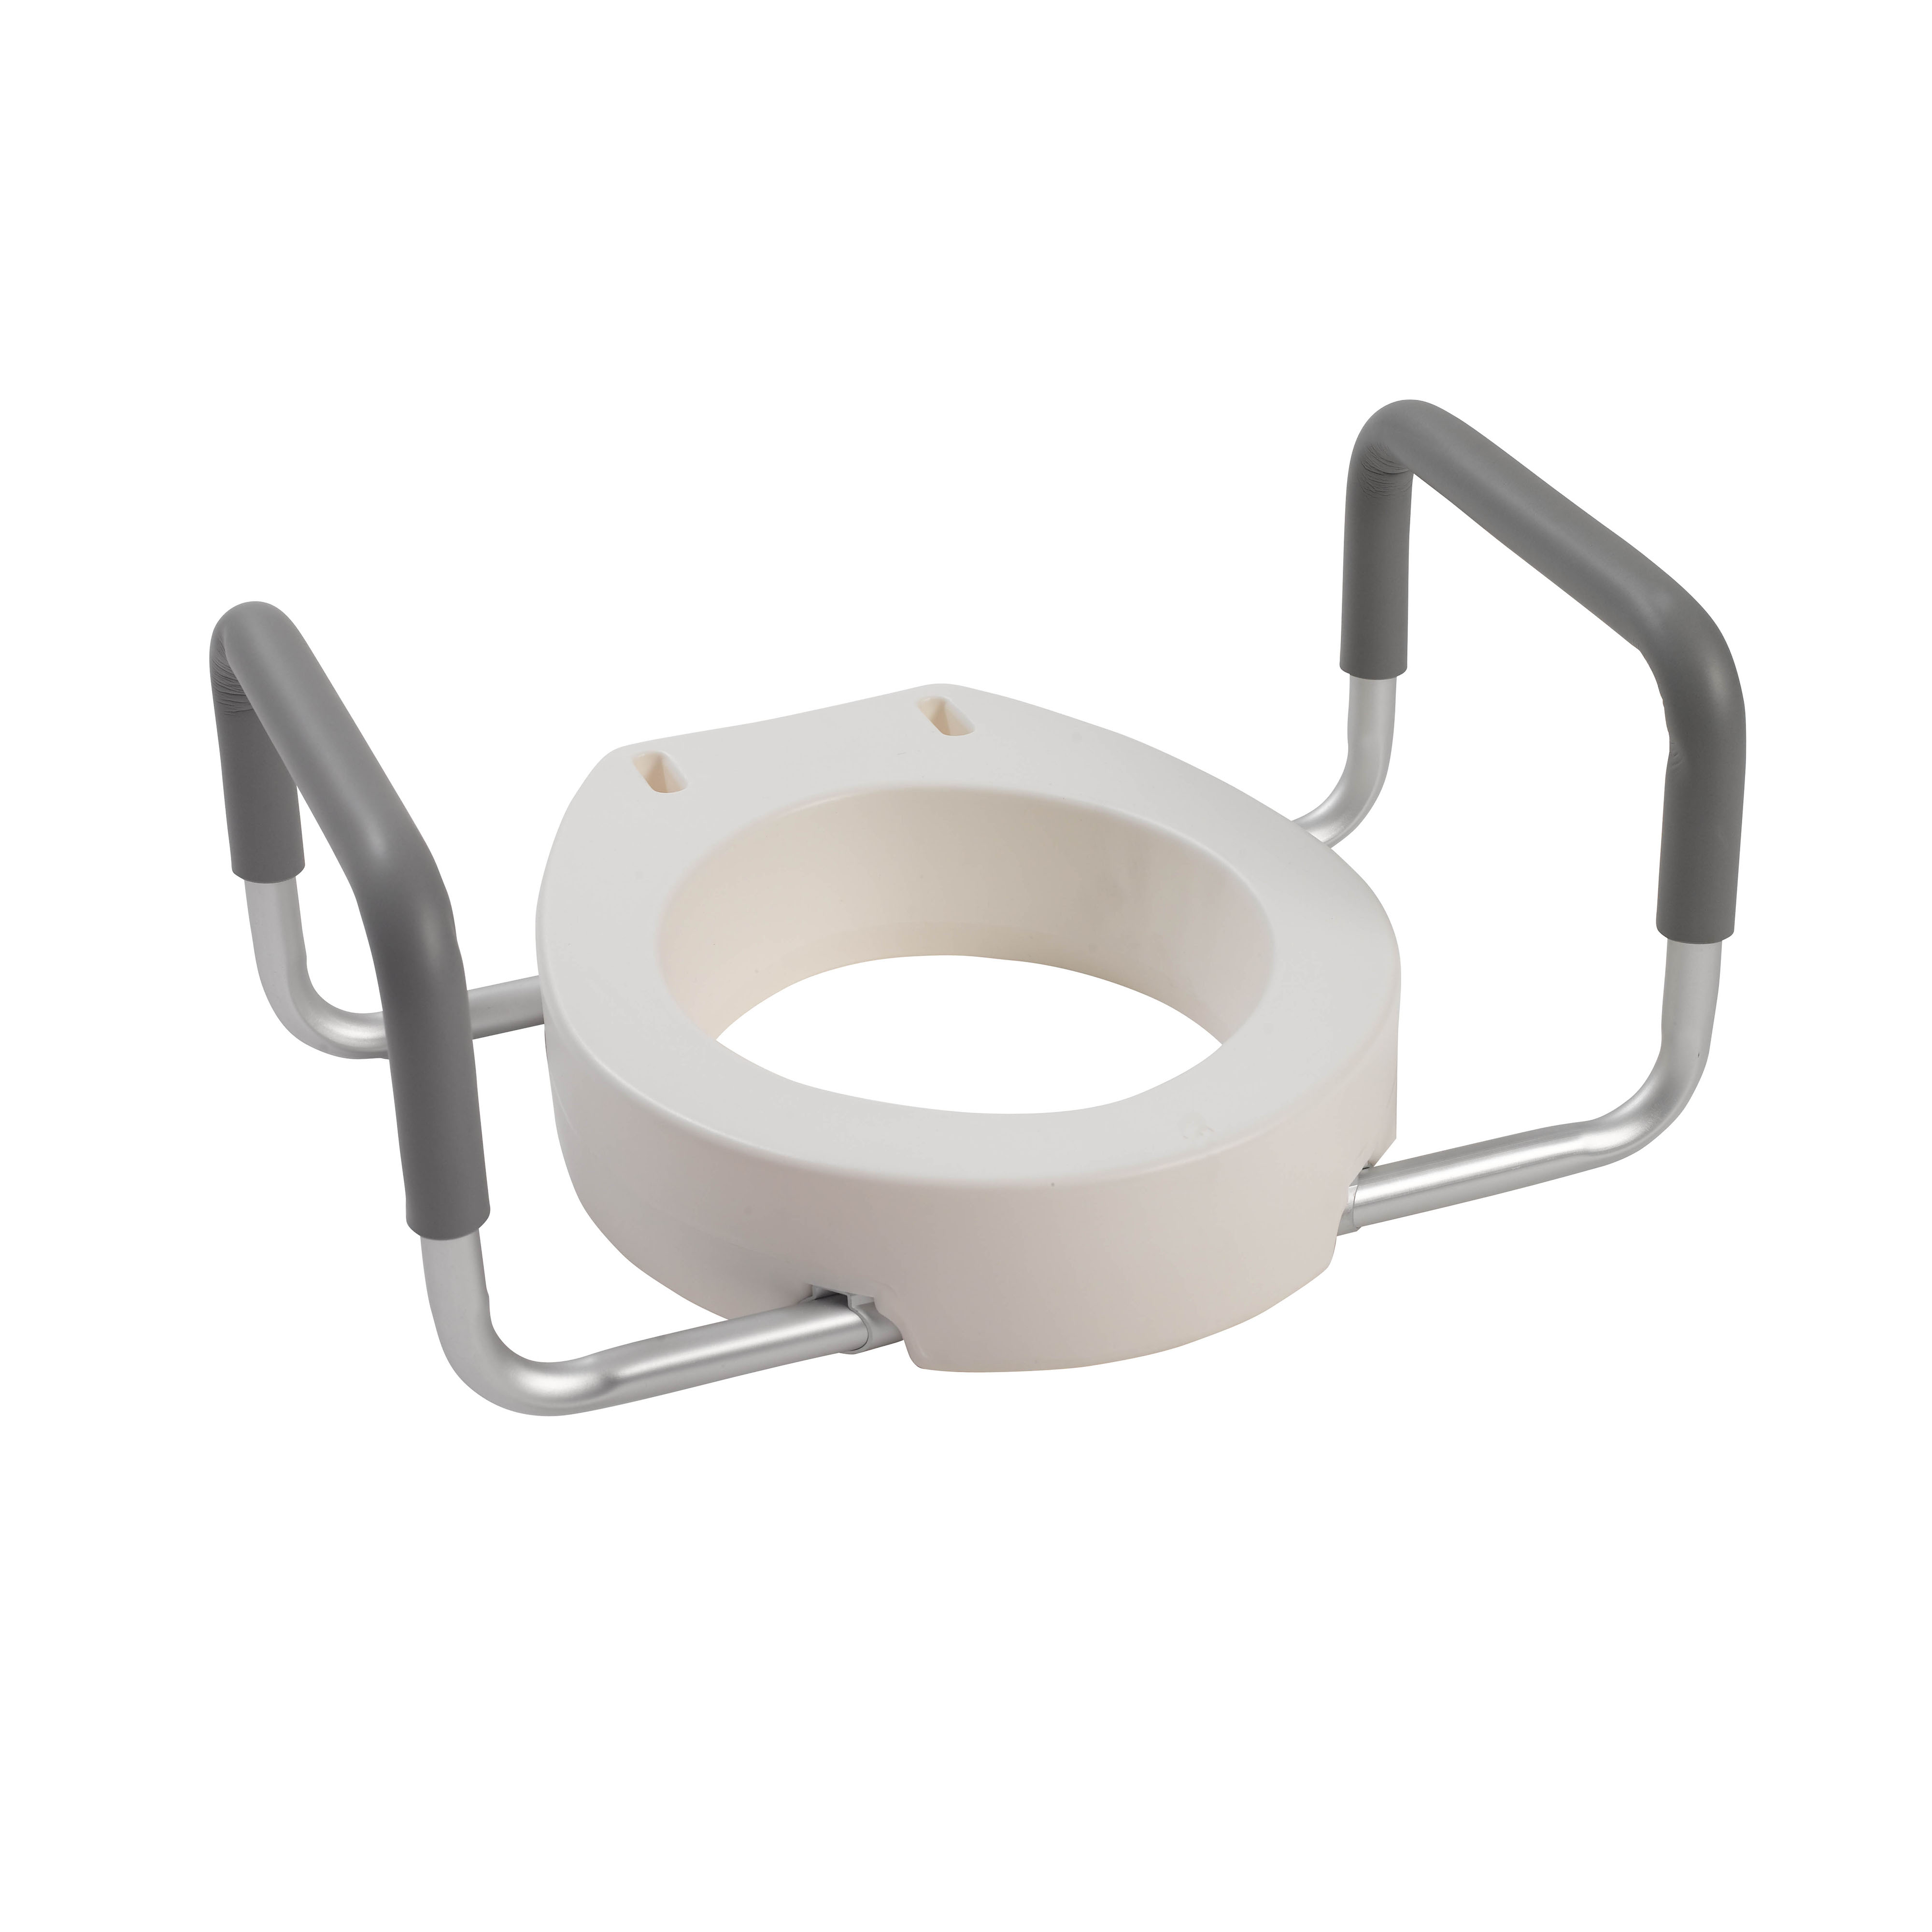 Drive Medical 12402 Premium Toilet Seat Riser with Removable Arms, Fits Standard Toilets Bathroom Safety